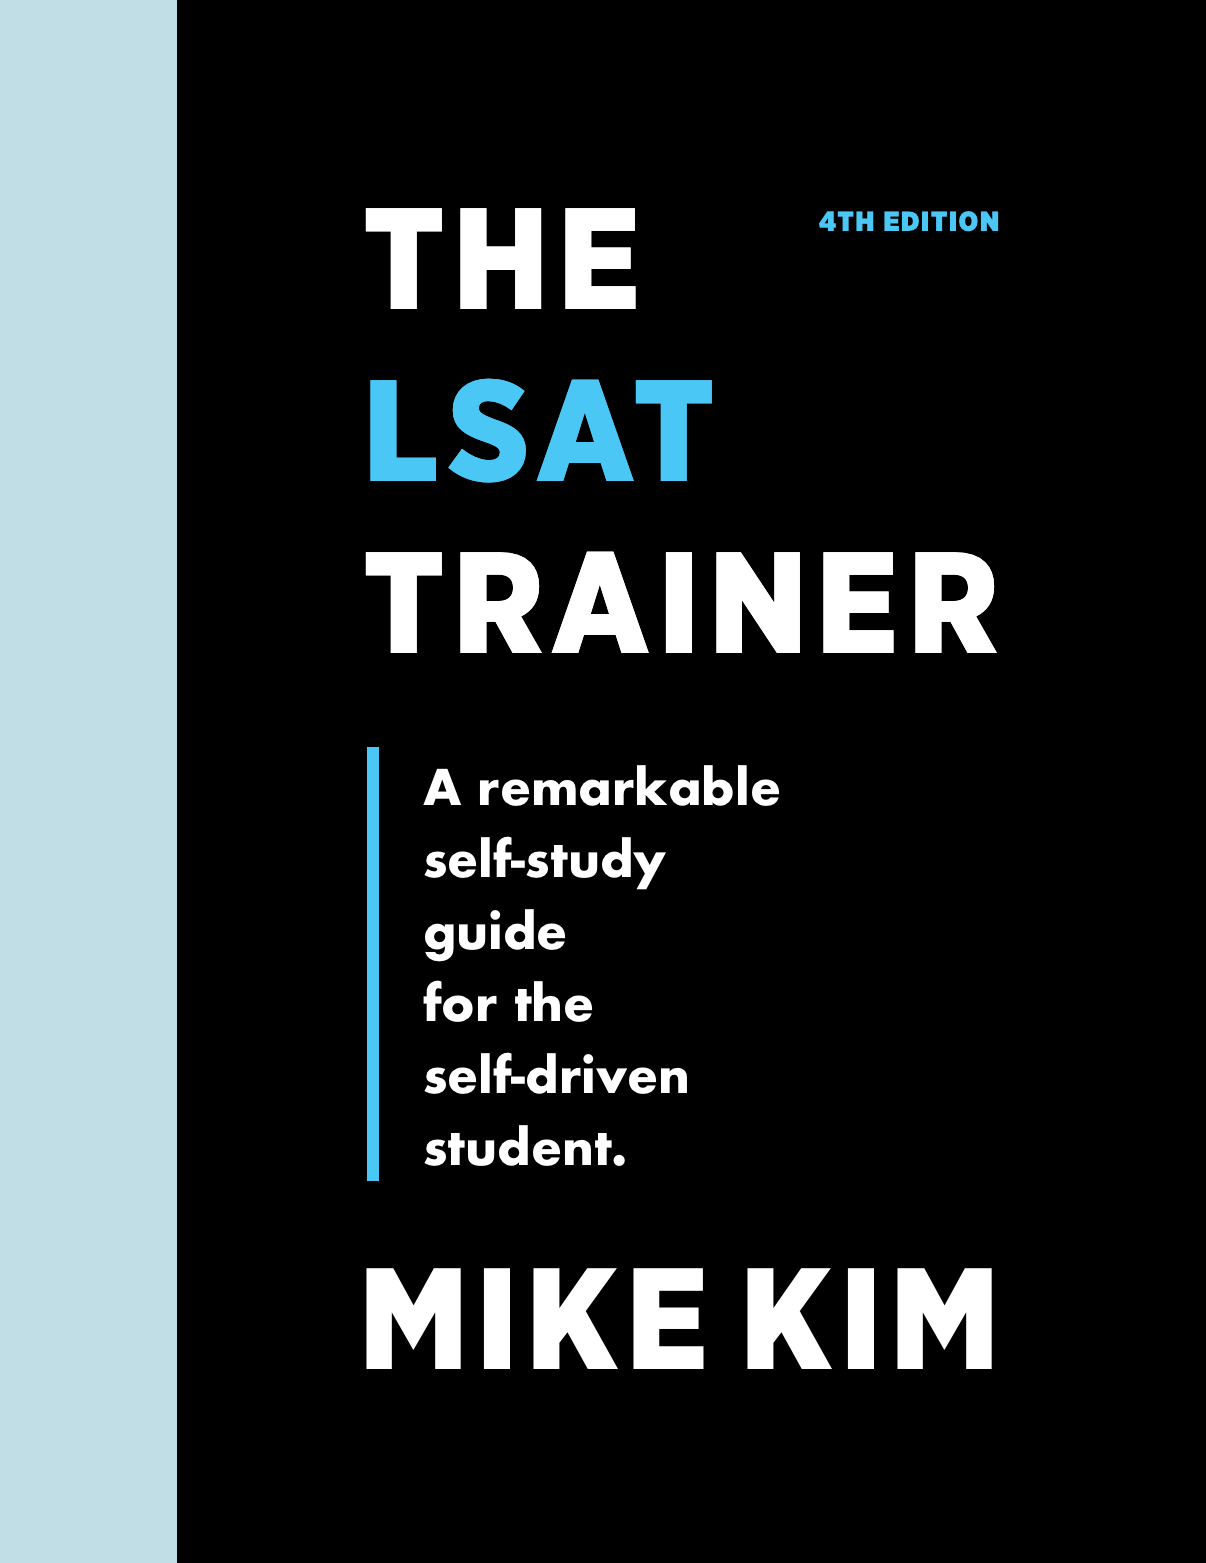 LSAT Trainer book cover